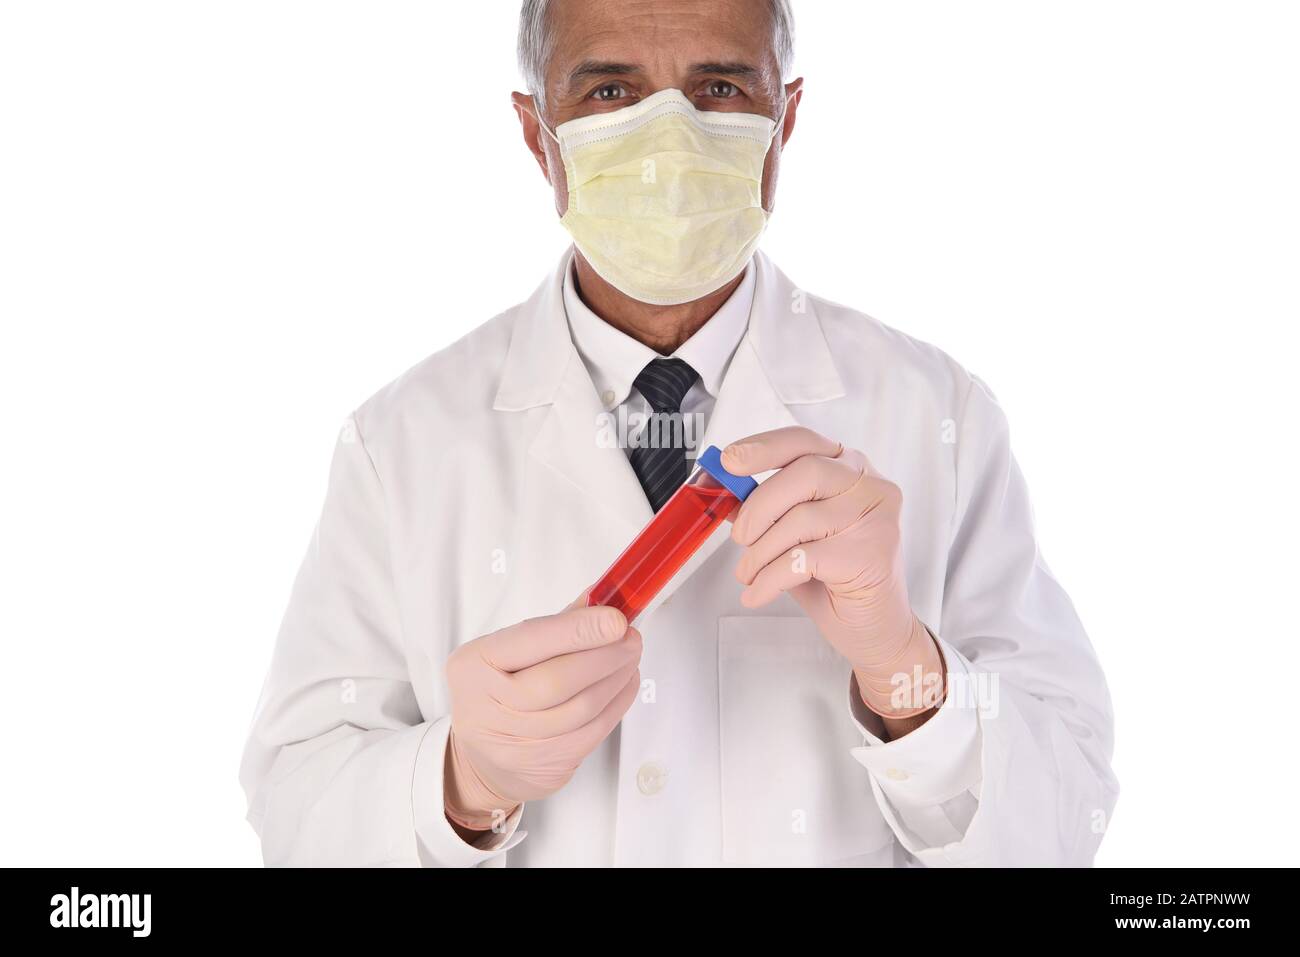 Laboratory Technician holding a vial of red liquid in front of his body. Man is wearing a protective mask to prevent infection. Stock Photo